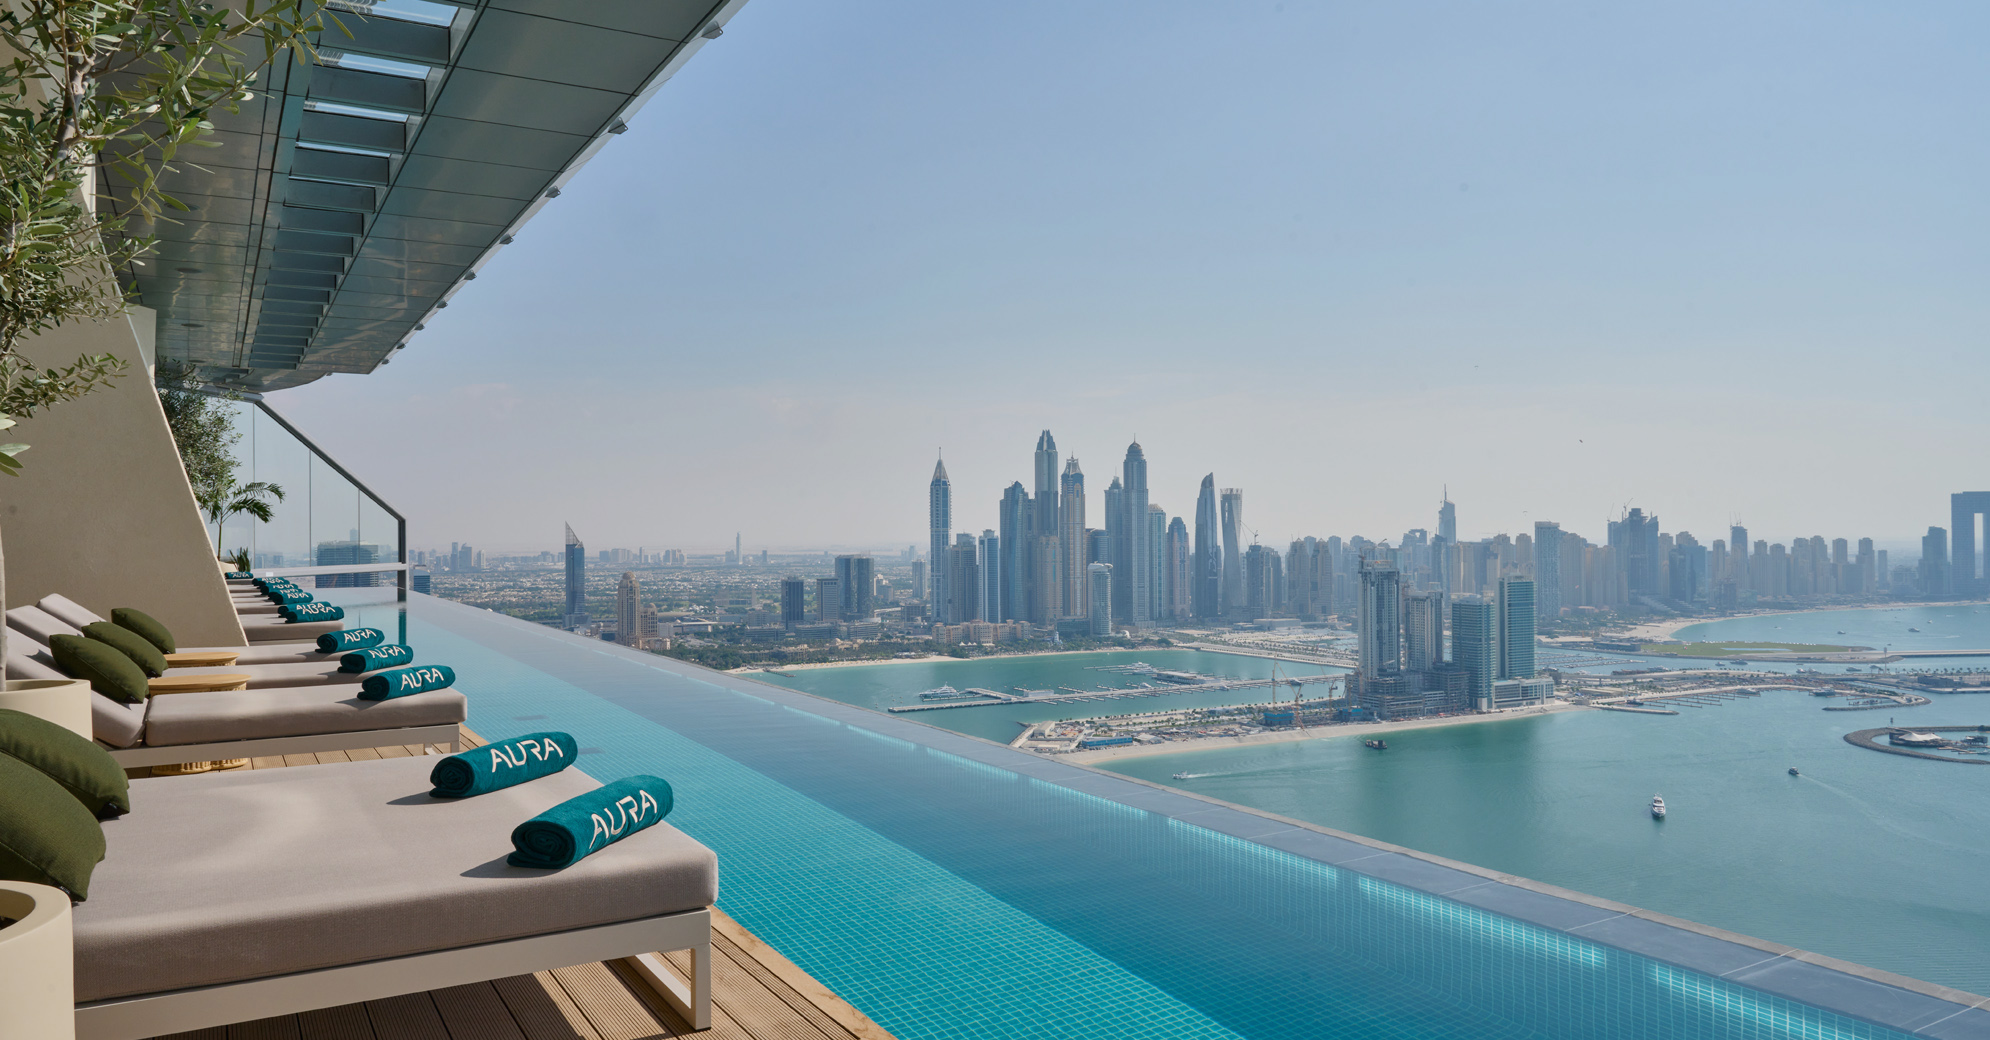 Top 10 Incredible Infinity Pools in the World to Take a Dip In